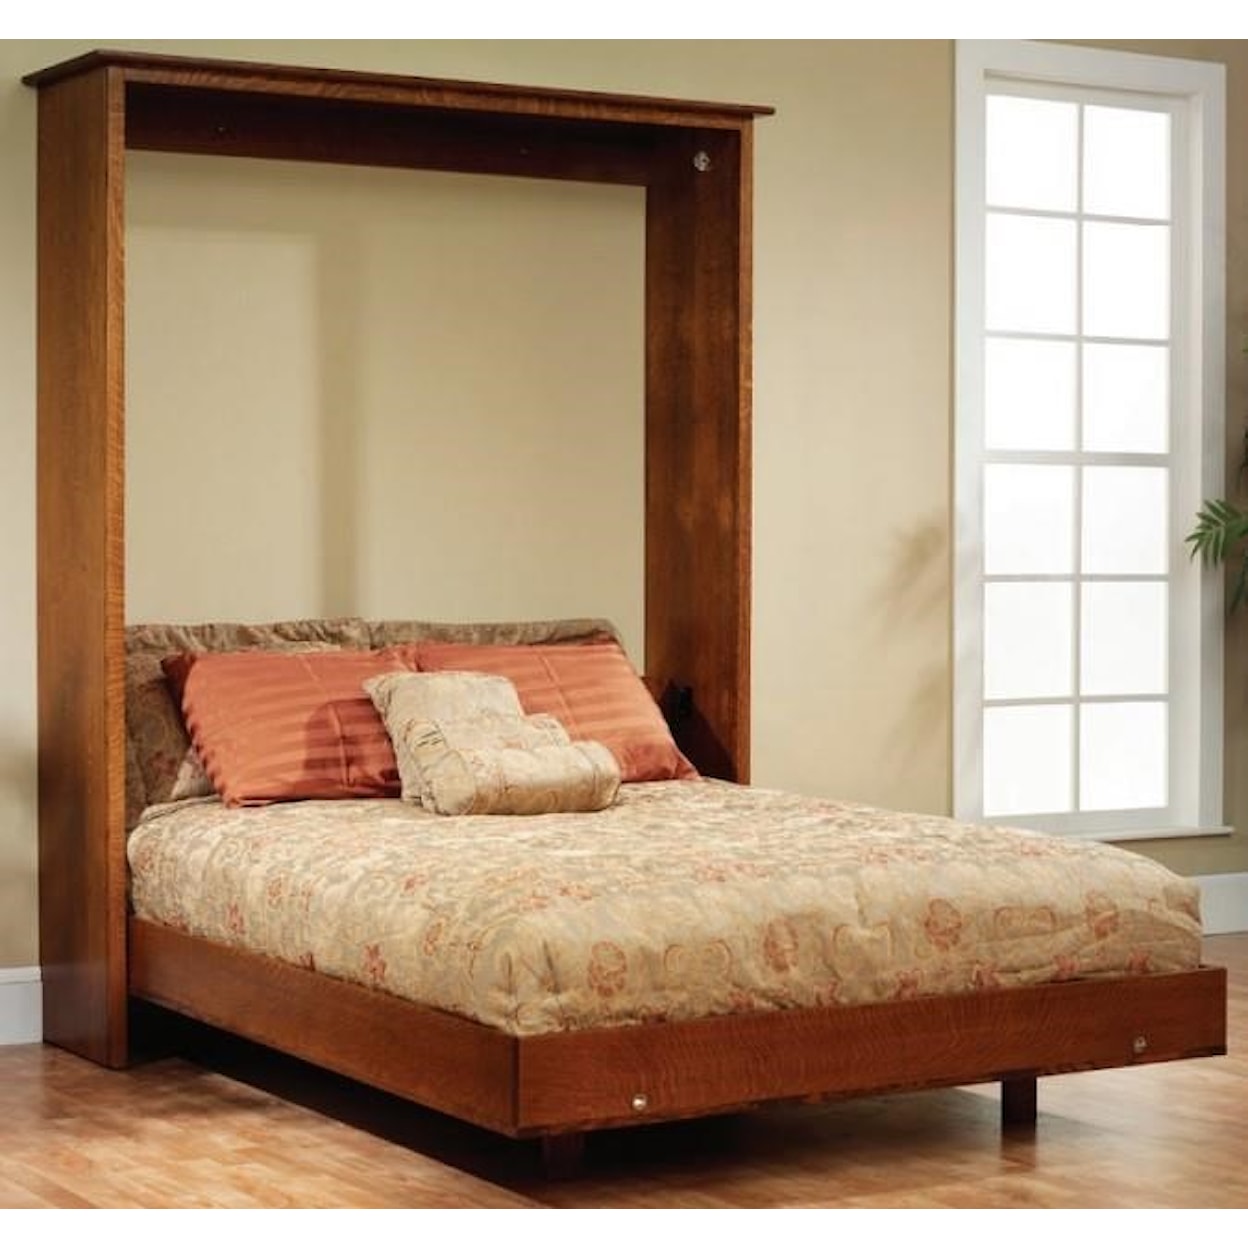 Millcraft Old English Mission Full Murphy Bed